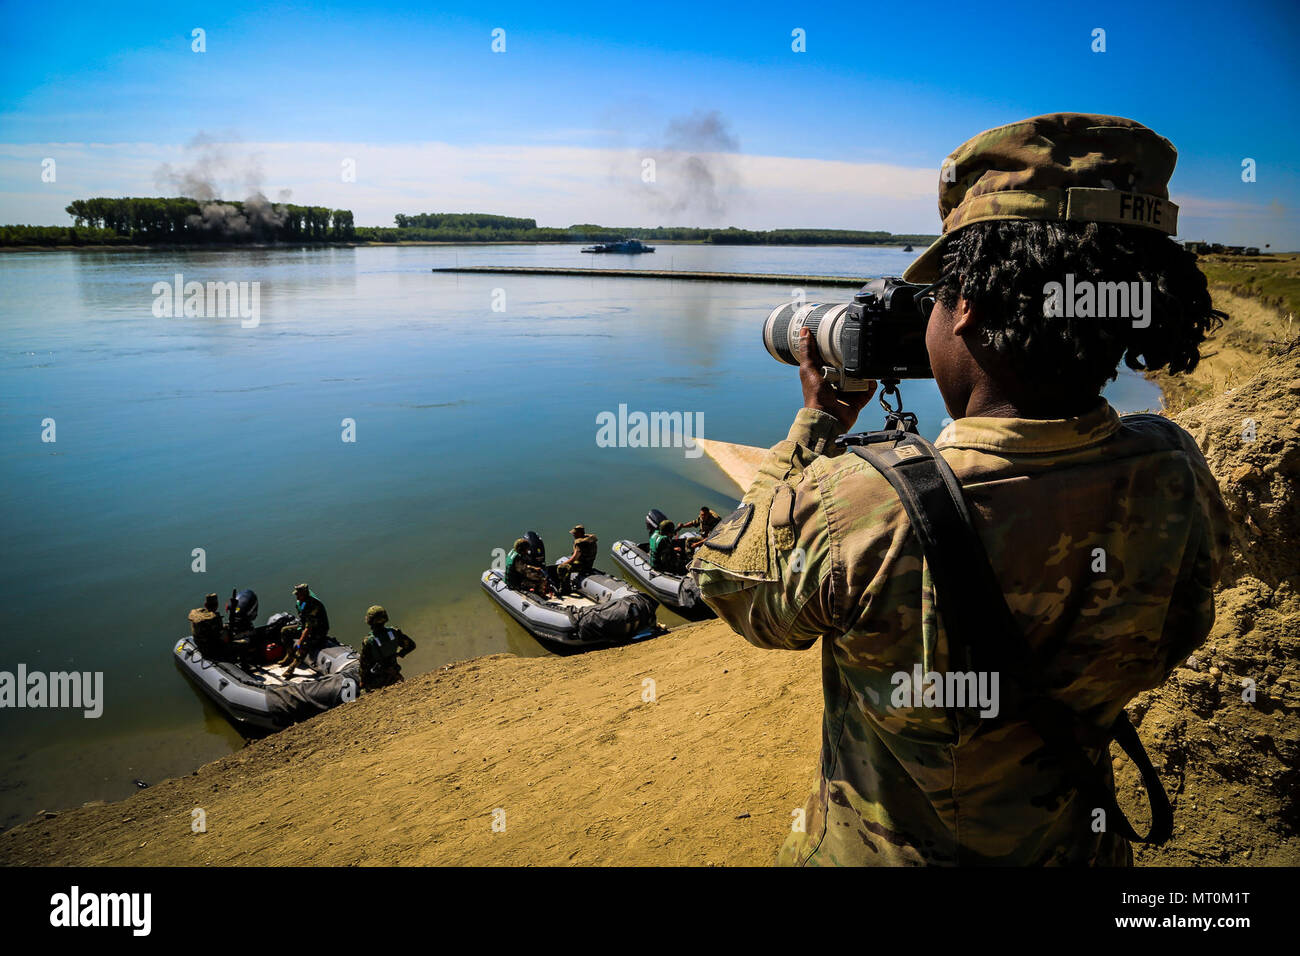 U.S. Army Private First Class Shekinah Frye, photographer assigned to 55th Signal Company (Combat Camera), documents a river crossing exercise during Saber Guardian 17 over the Danube River, Bordusani, Romania, July 15, 2017. Saber Guardian is a U.S. Army Europe-led multinational exercise that spans across Bulgaria, Hungary and Romania with more than 25,000 service members from 22 allied and partner nations. (U.S. Army photo by Staff Sgt. Timothy Villareal/Released) Stock Photo